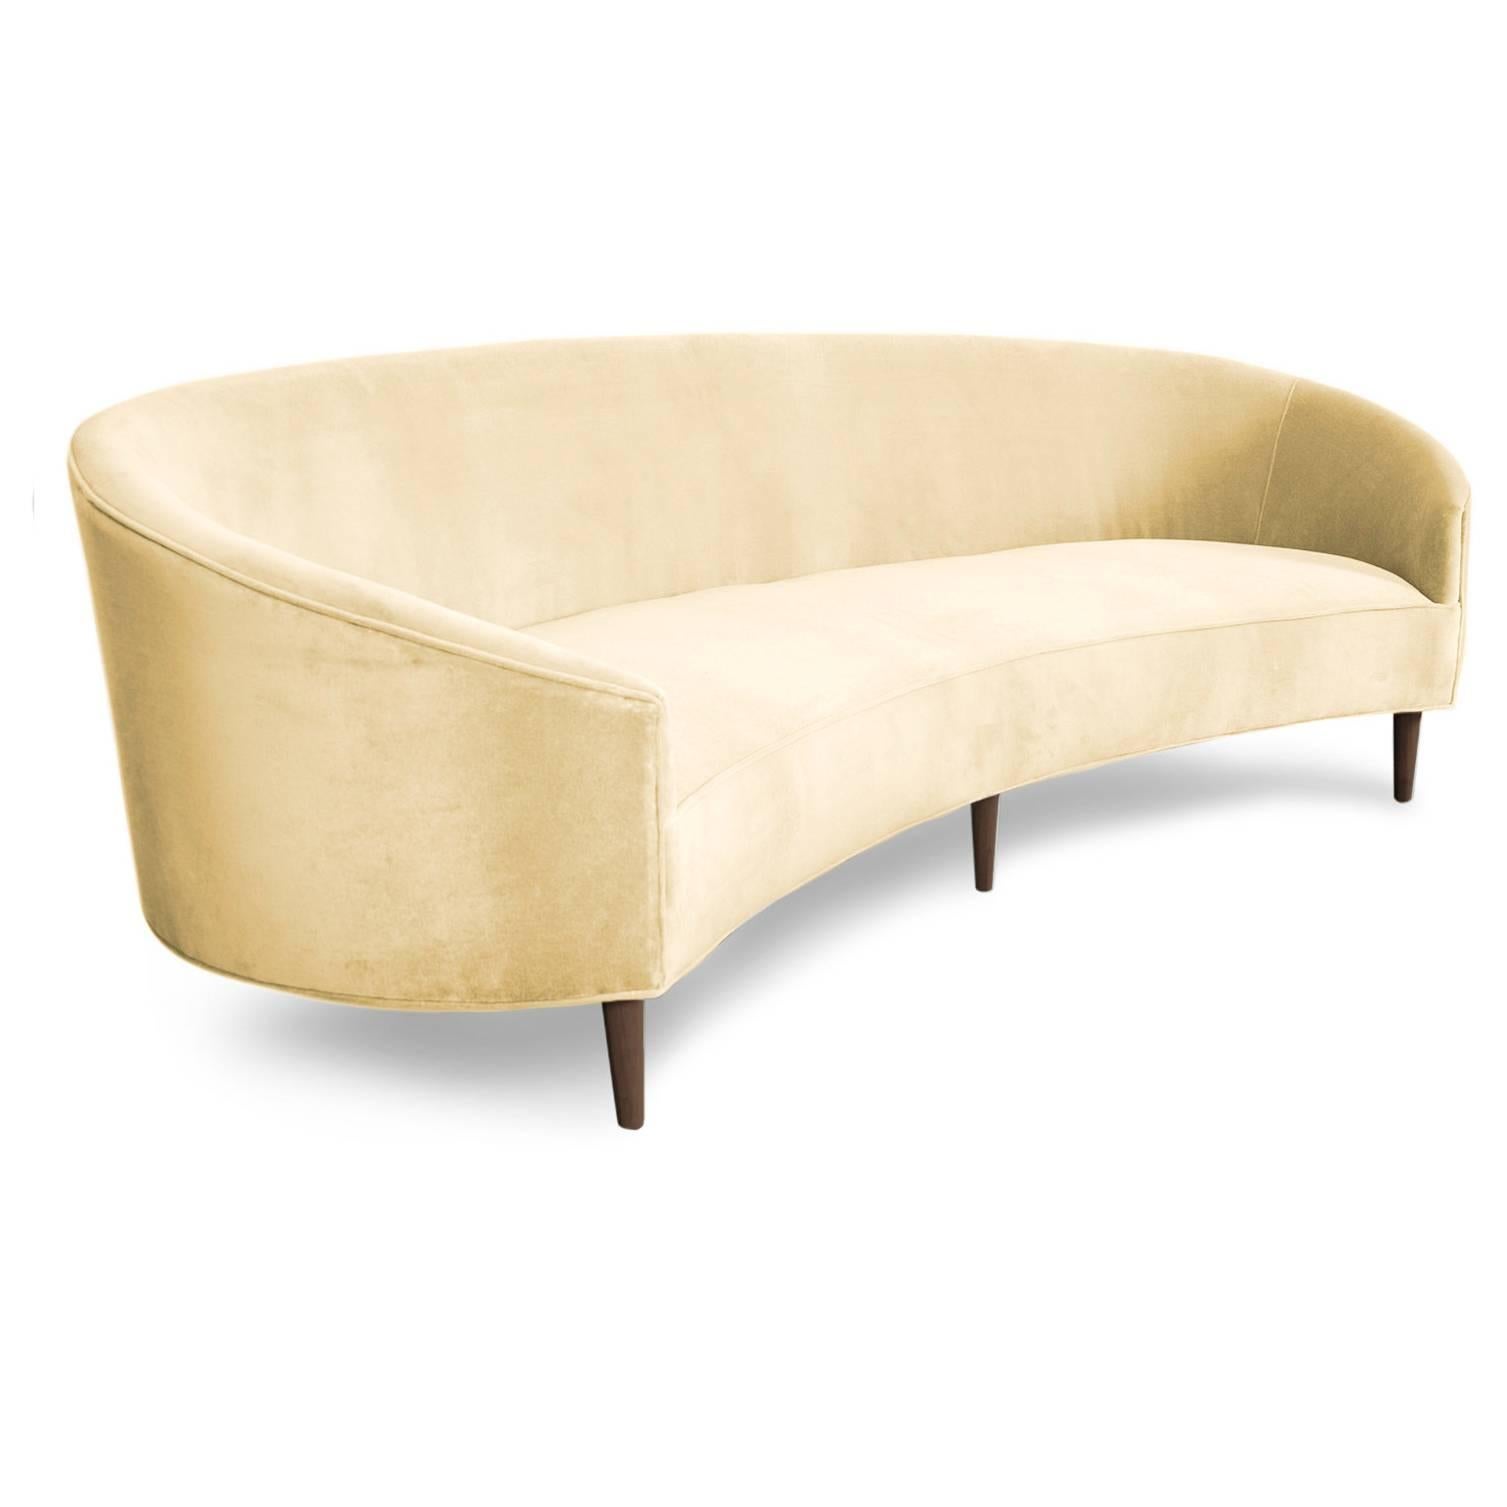 With Classic clean lines and sharp curves comes Modshop's Art Deco sofa. Uniquely shaped, similar to a crescent, curved in arms and six walnut cone legs put together in elegance. Shown in Hollandaise velvet.

Measuares: 105